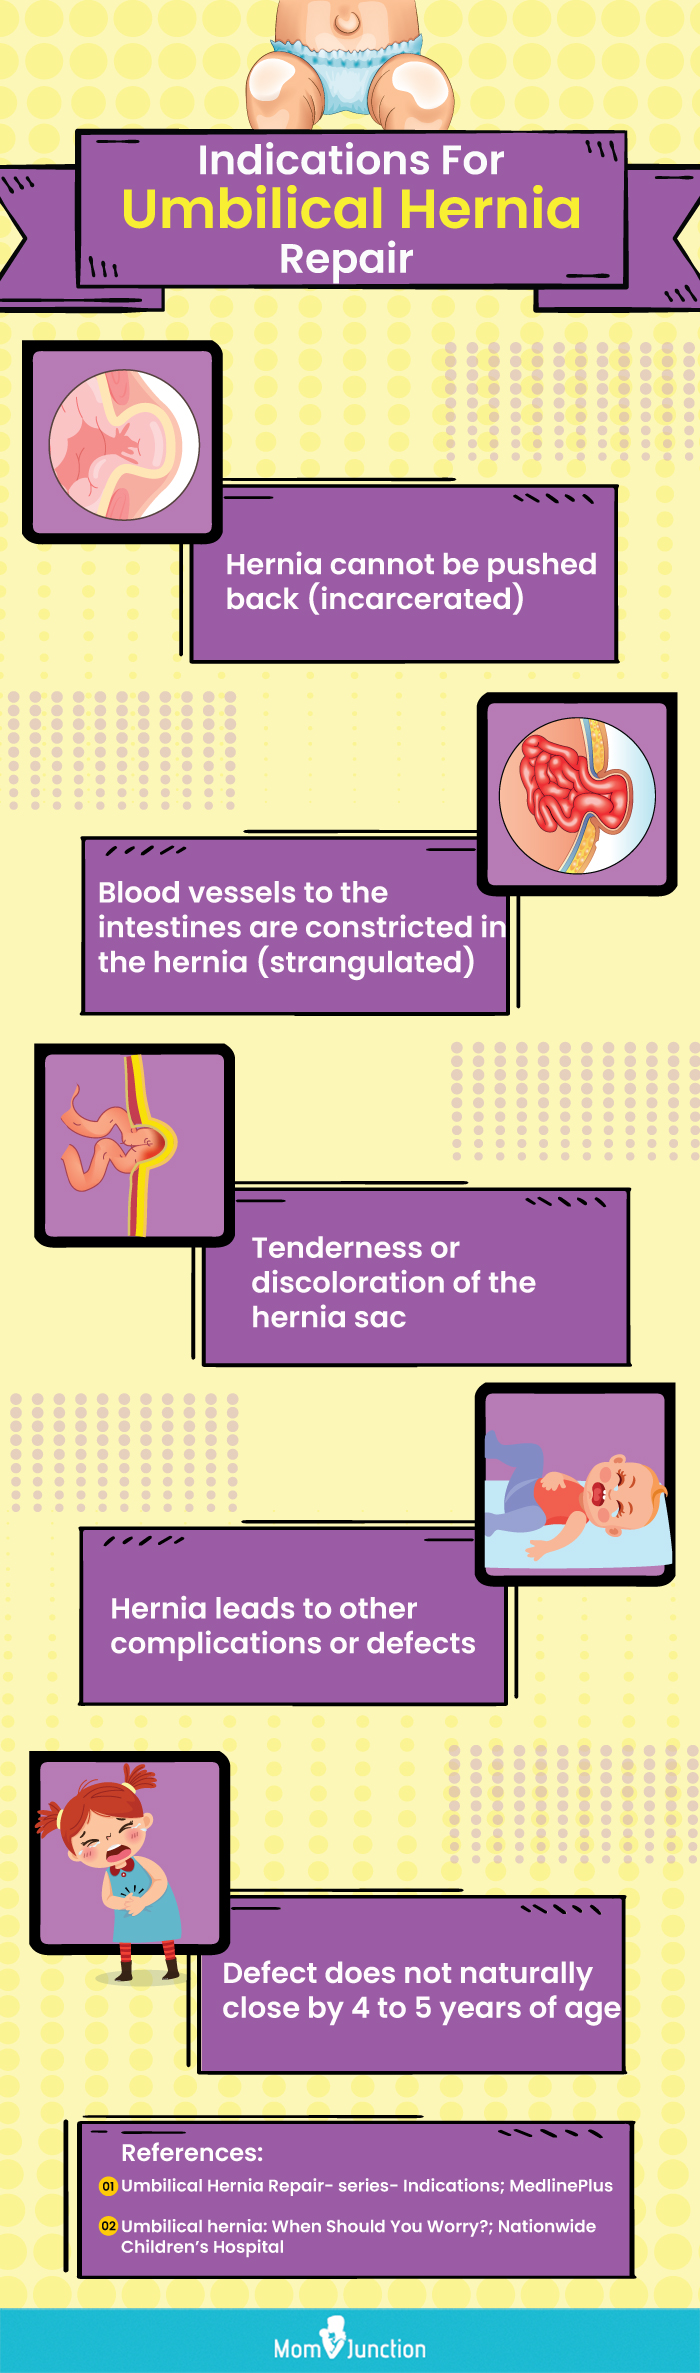 indications for umbilical hernia repair [infographic]